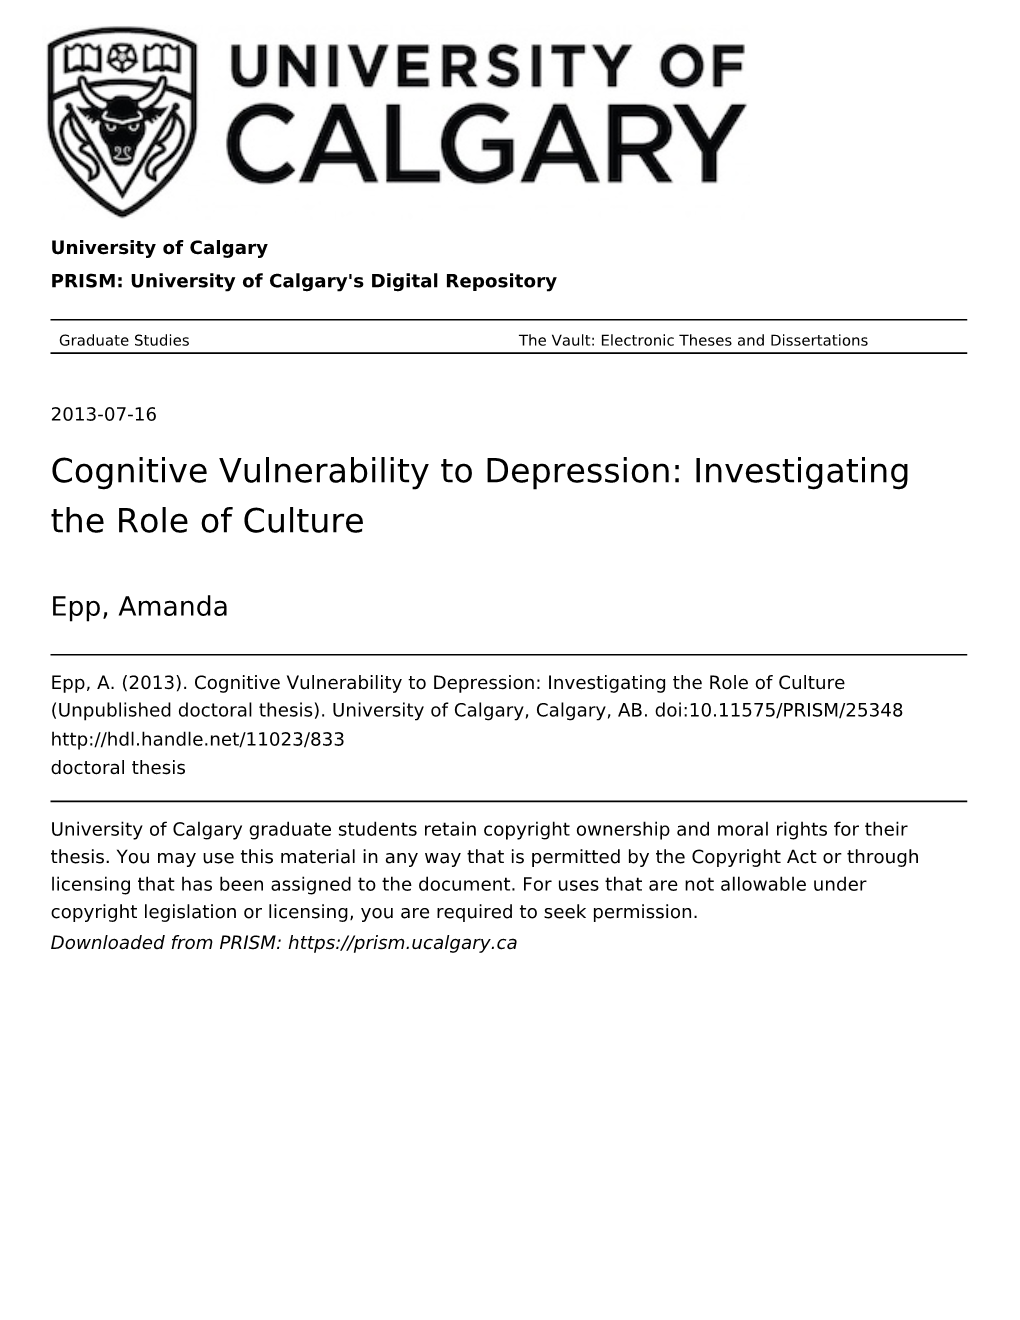 Cognitive Vulnerability to Depression: Investigating the Role of Culture